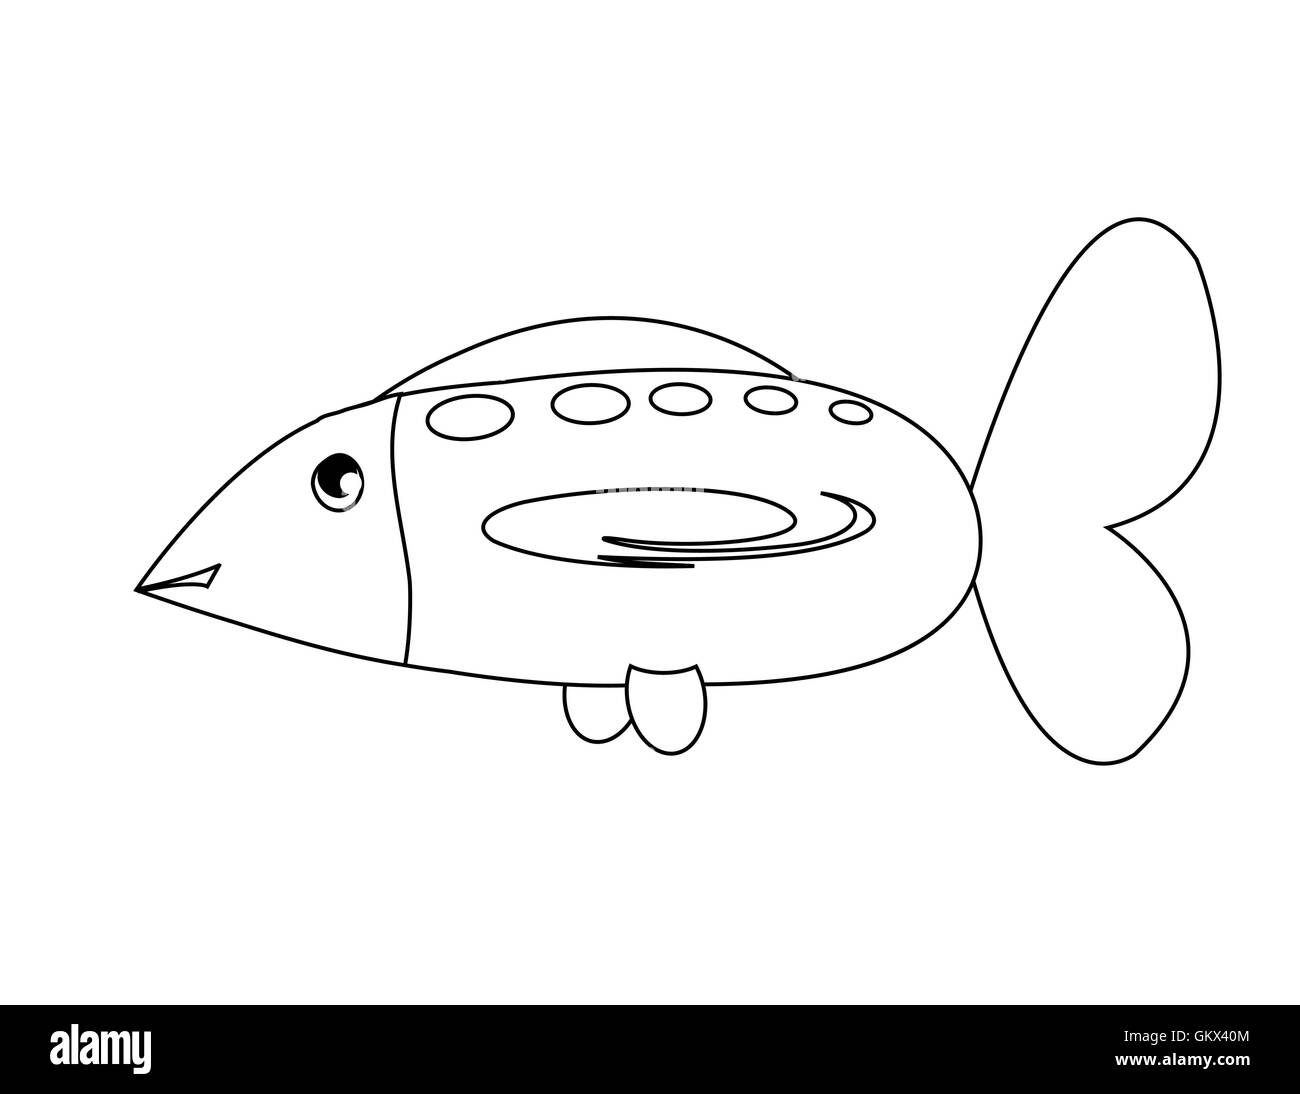 coloring with fish Stock Vector